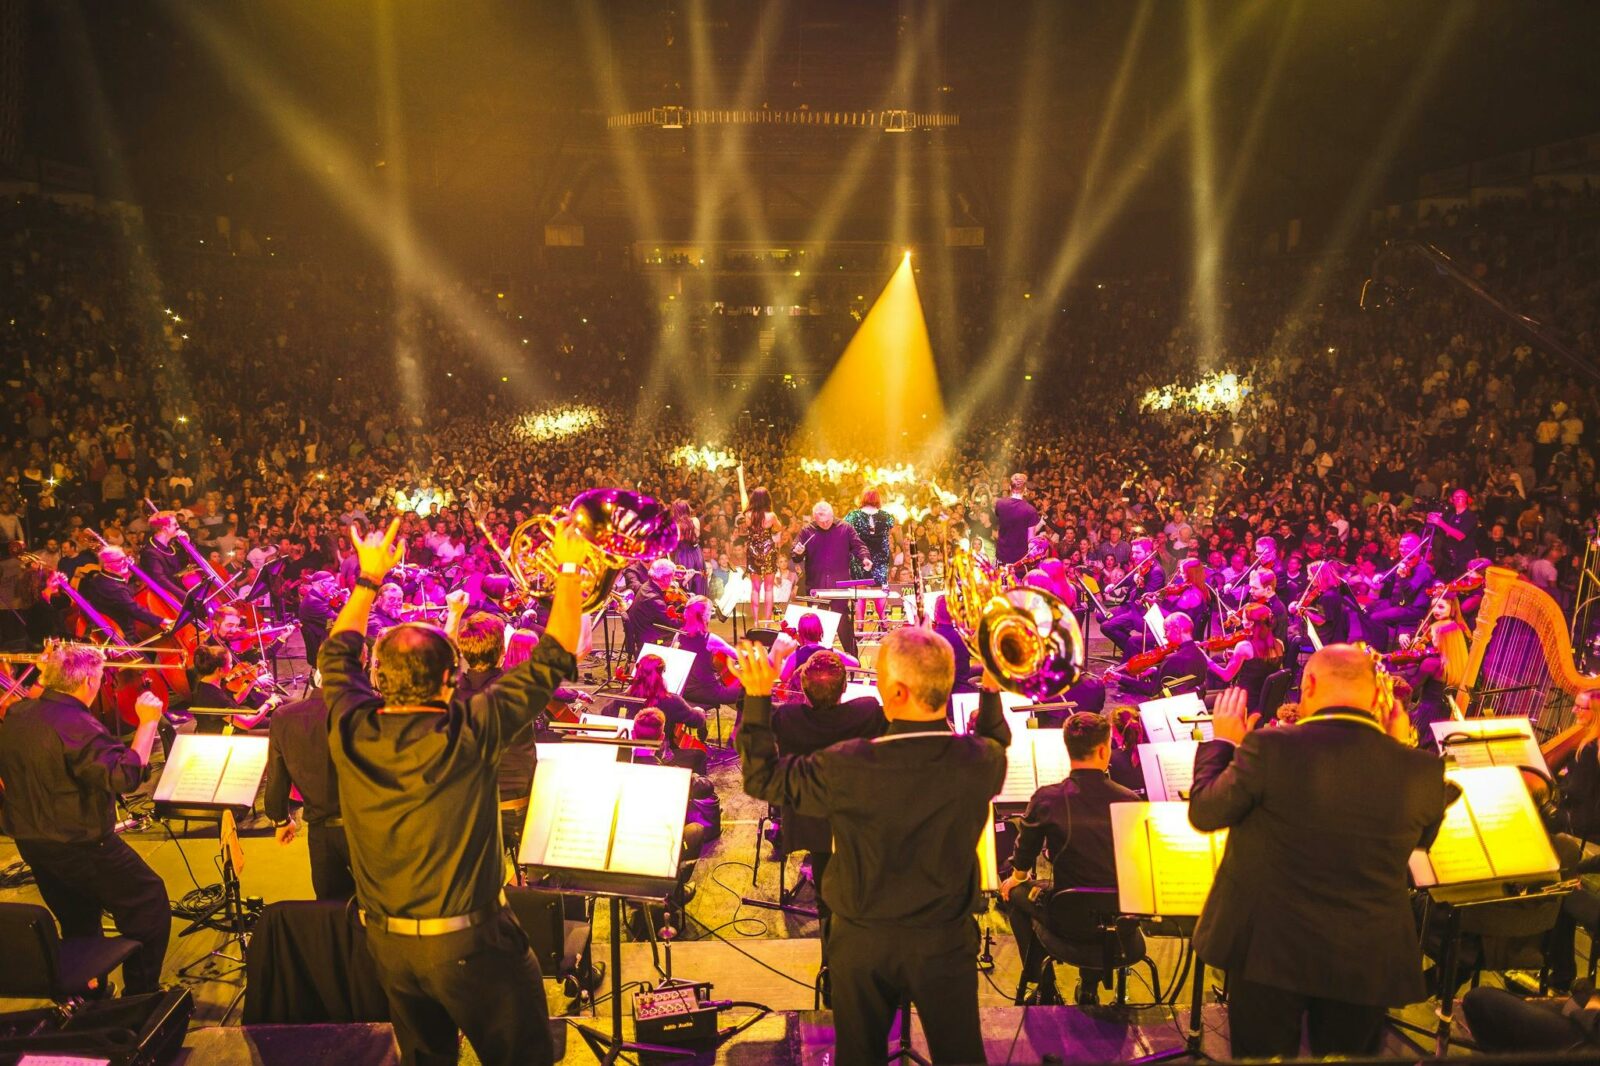 An orchestra performs to a crowd, with bright flashing lights overhead